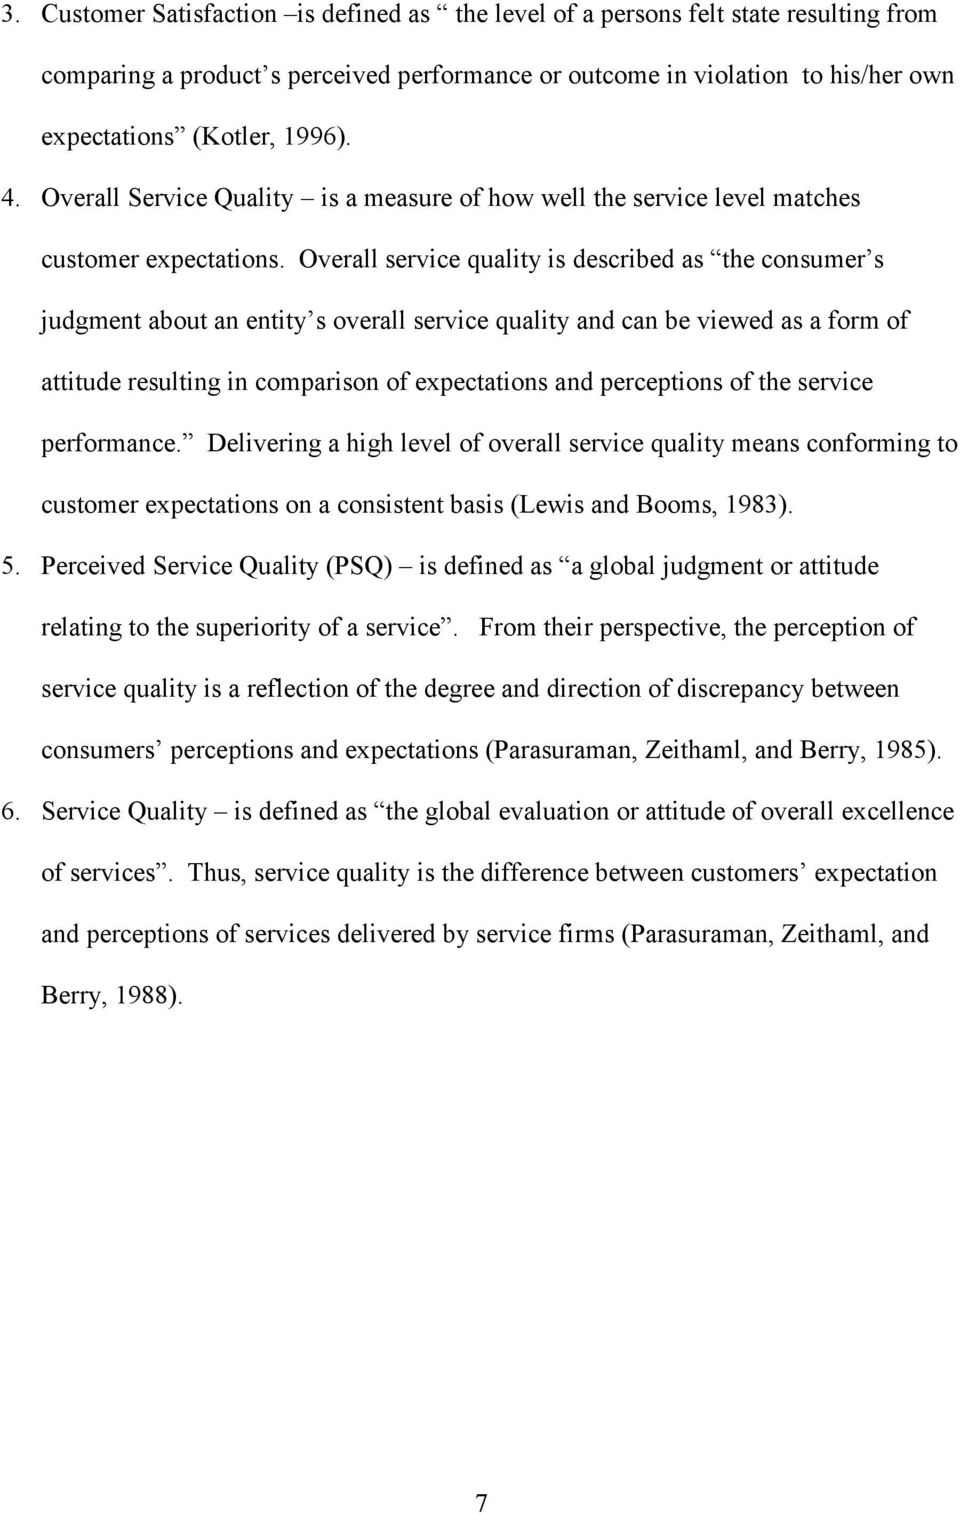 Overall service quality is described as the consumer s judgment about an entity s overall service quality and can be viewed as a form of attitude resulting in comparison of expectations and